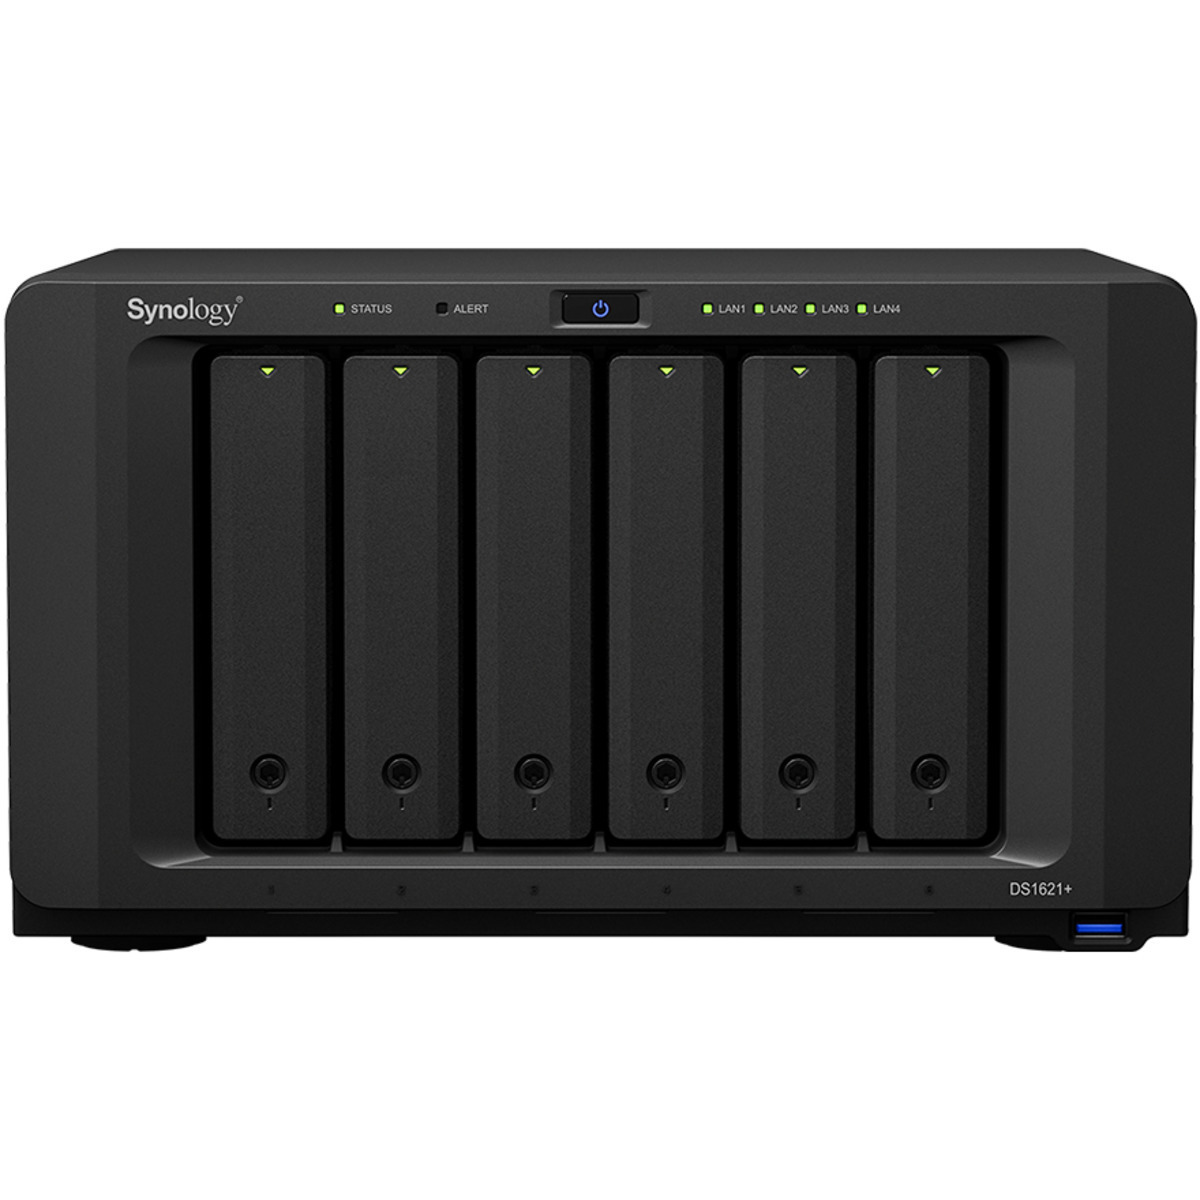 Synology DiskStation DS1621+ 36tb 6-Bay Desktop Multimedia / Power User / Business NAS - Network Attached Storage Device 3x12tb Western Digital Red Pro WD121KFBX 3.5 7200rpm SATA 6Gb/s HDD NAS Class Drives Installed - Burn-In Tested - FREE RAM UPGRADE DiskStation DS1621+